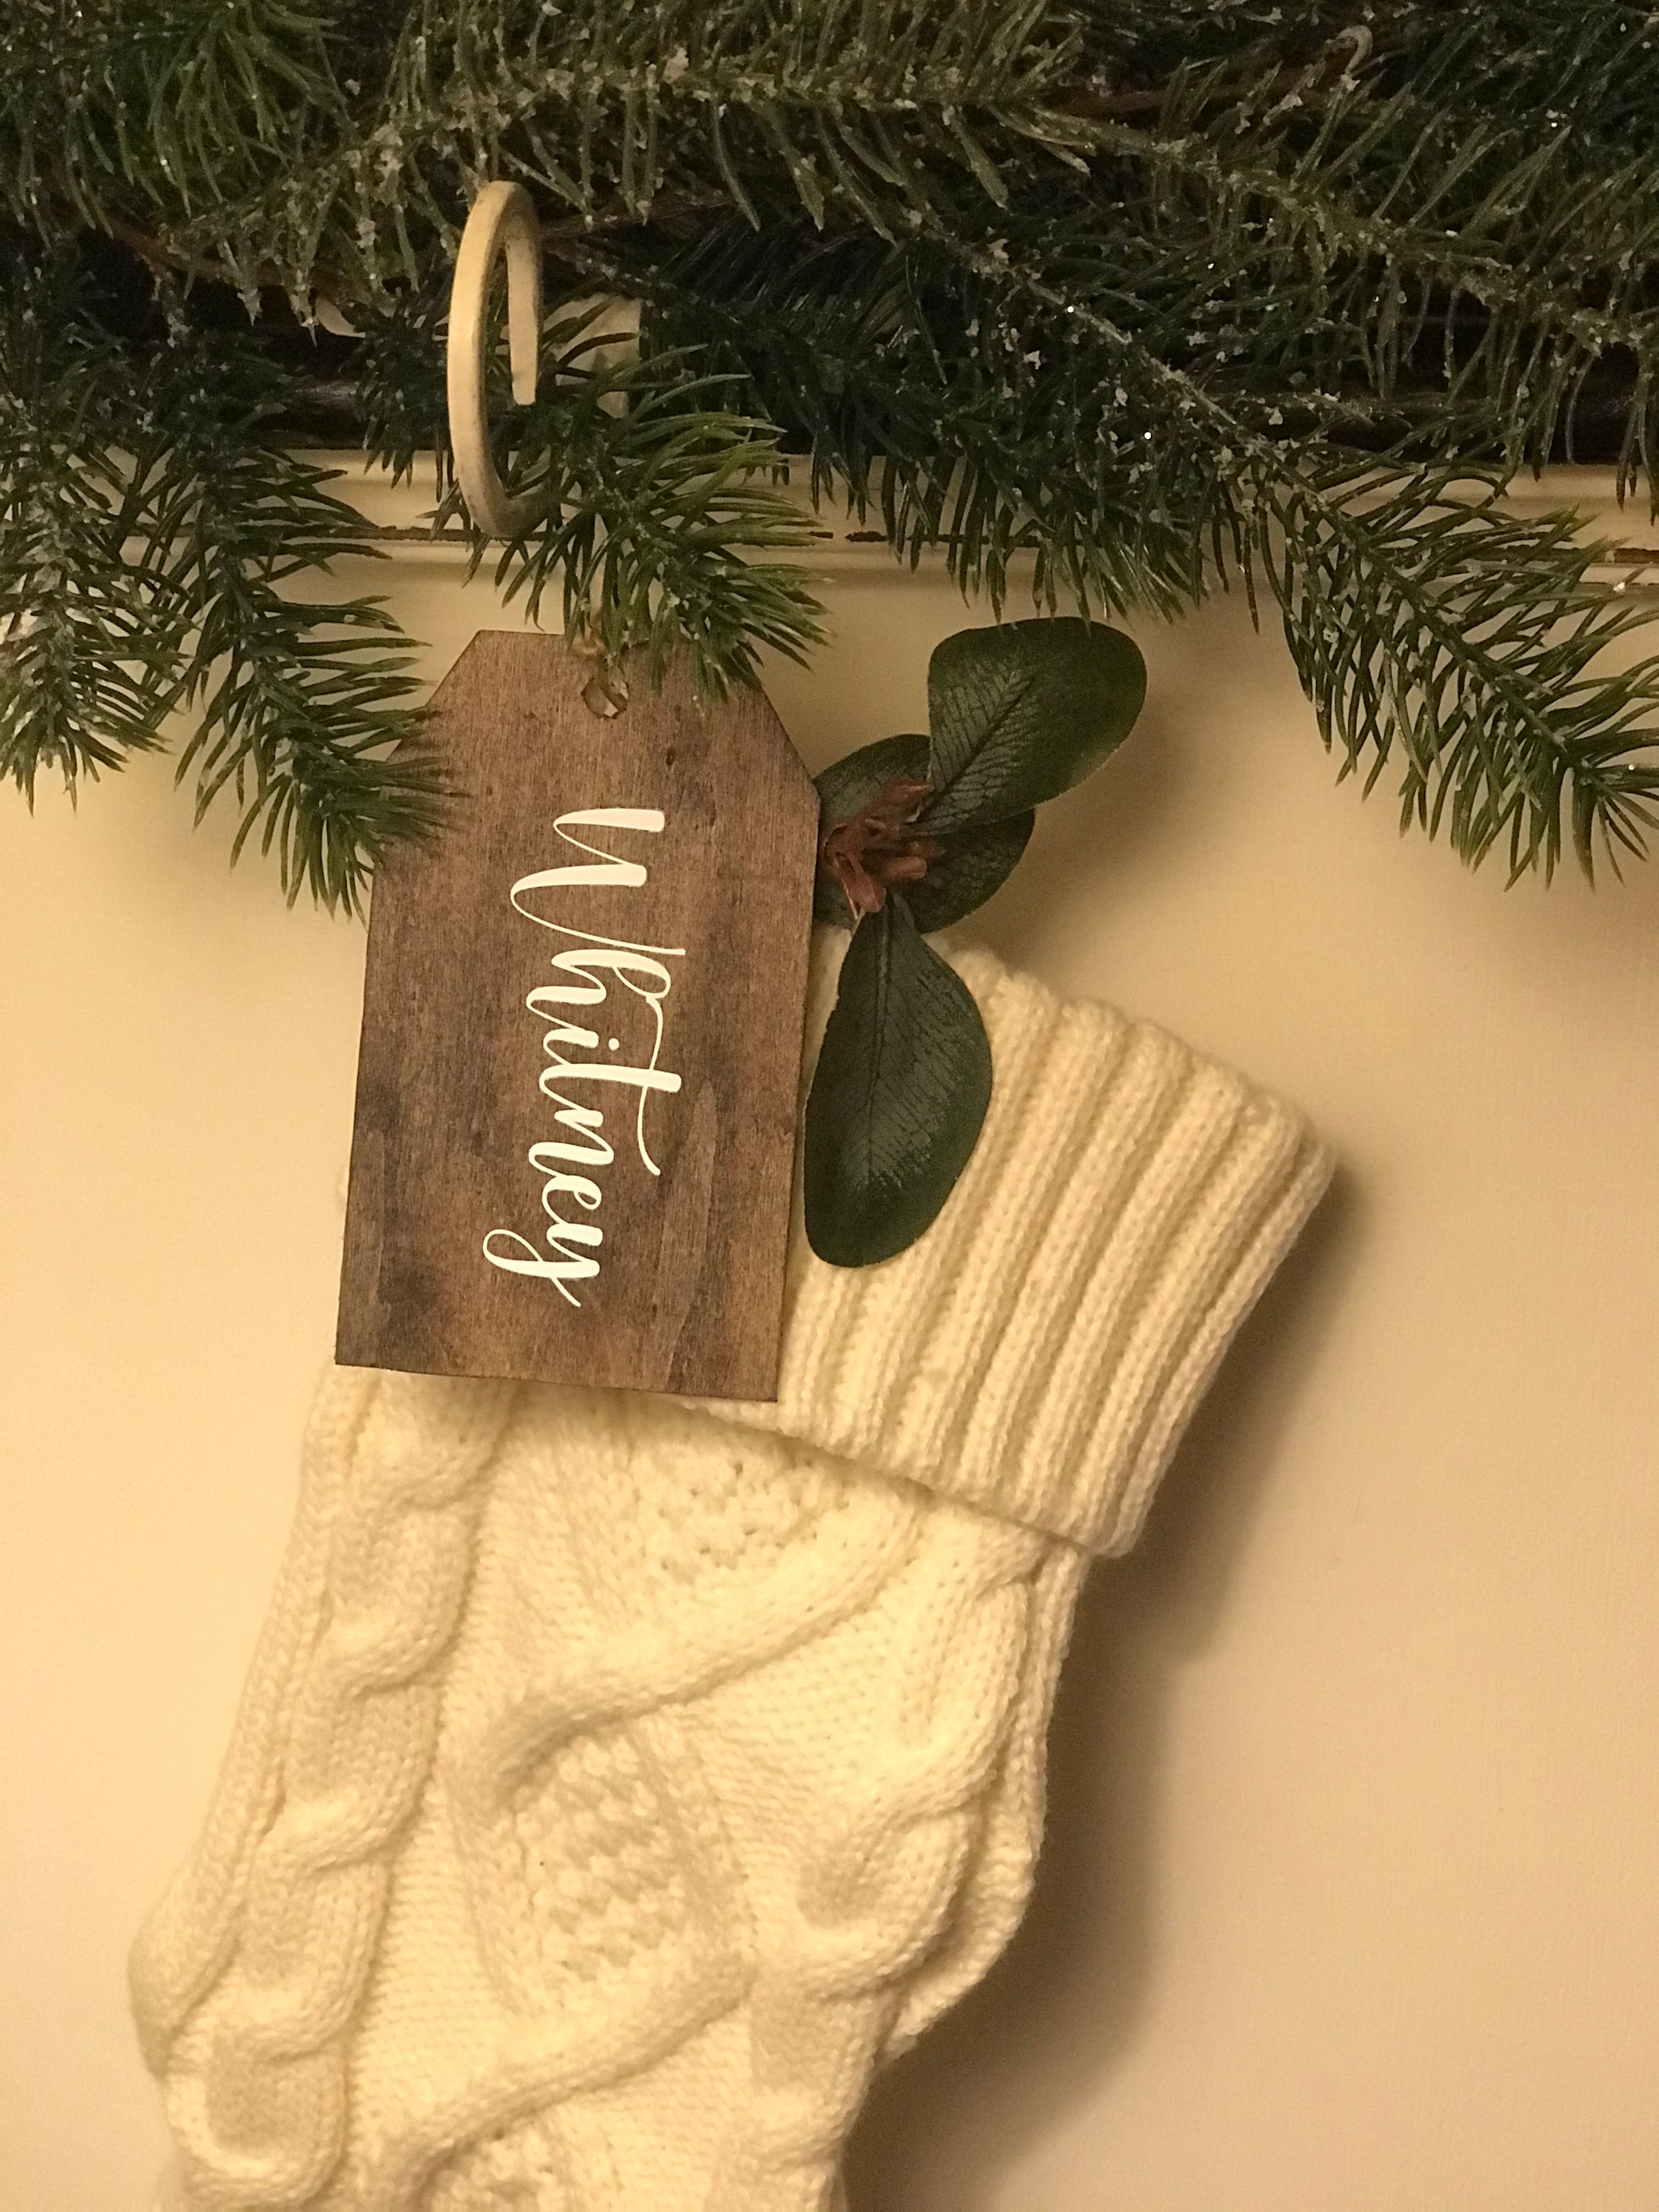 Personalized Wooden Stocking Name Tag - The Christmas Pickle